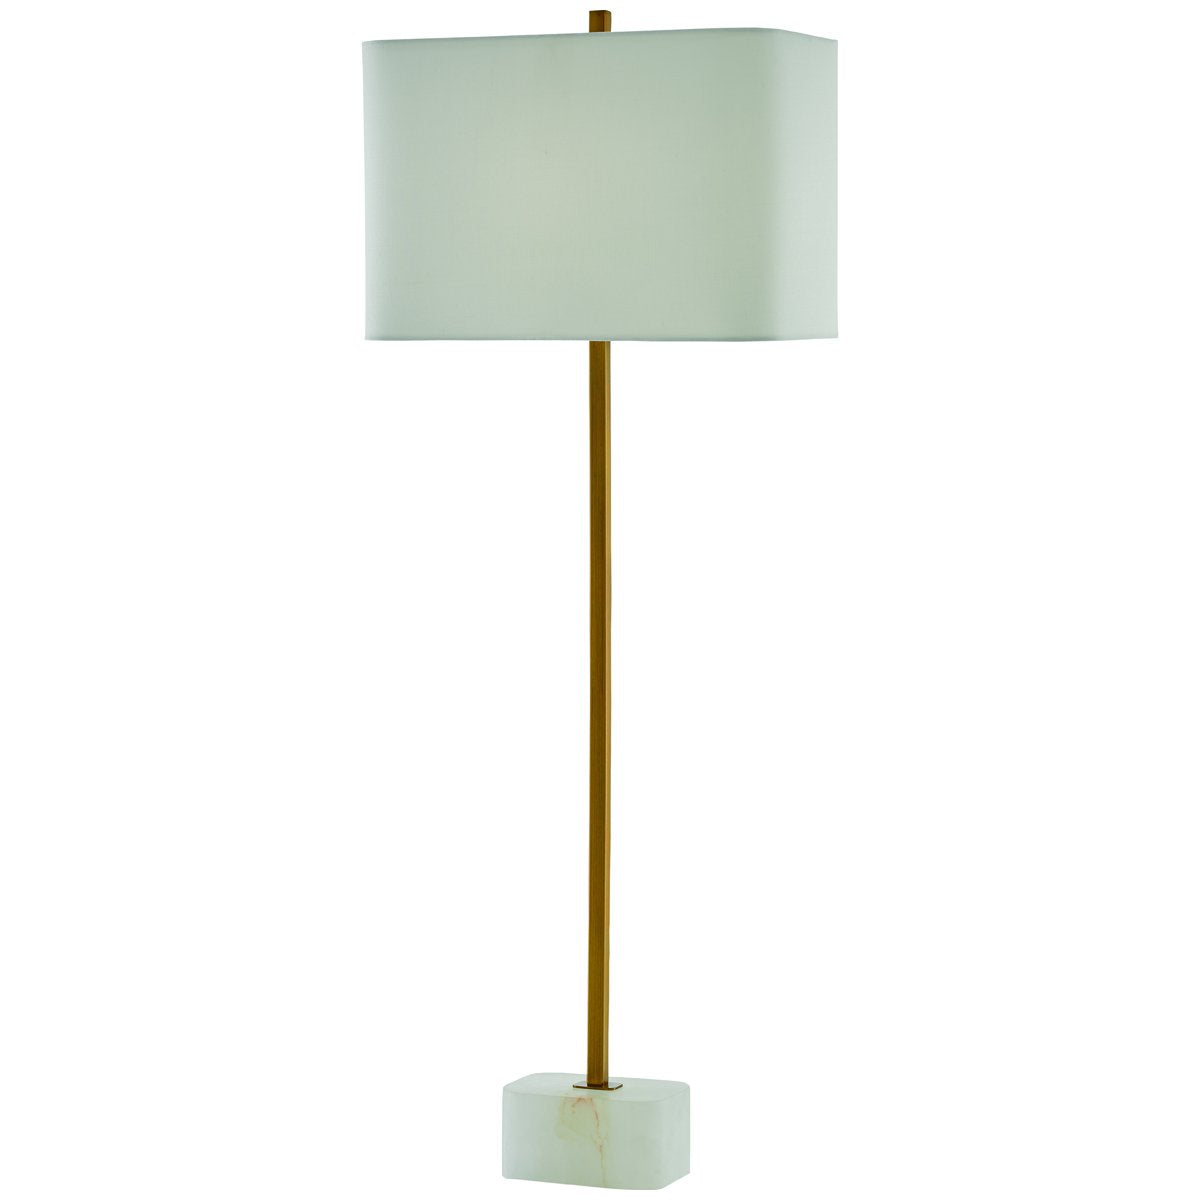 Currey and Company Felix Table Lamp